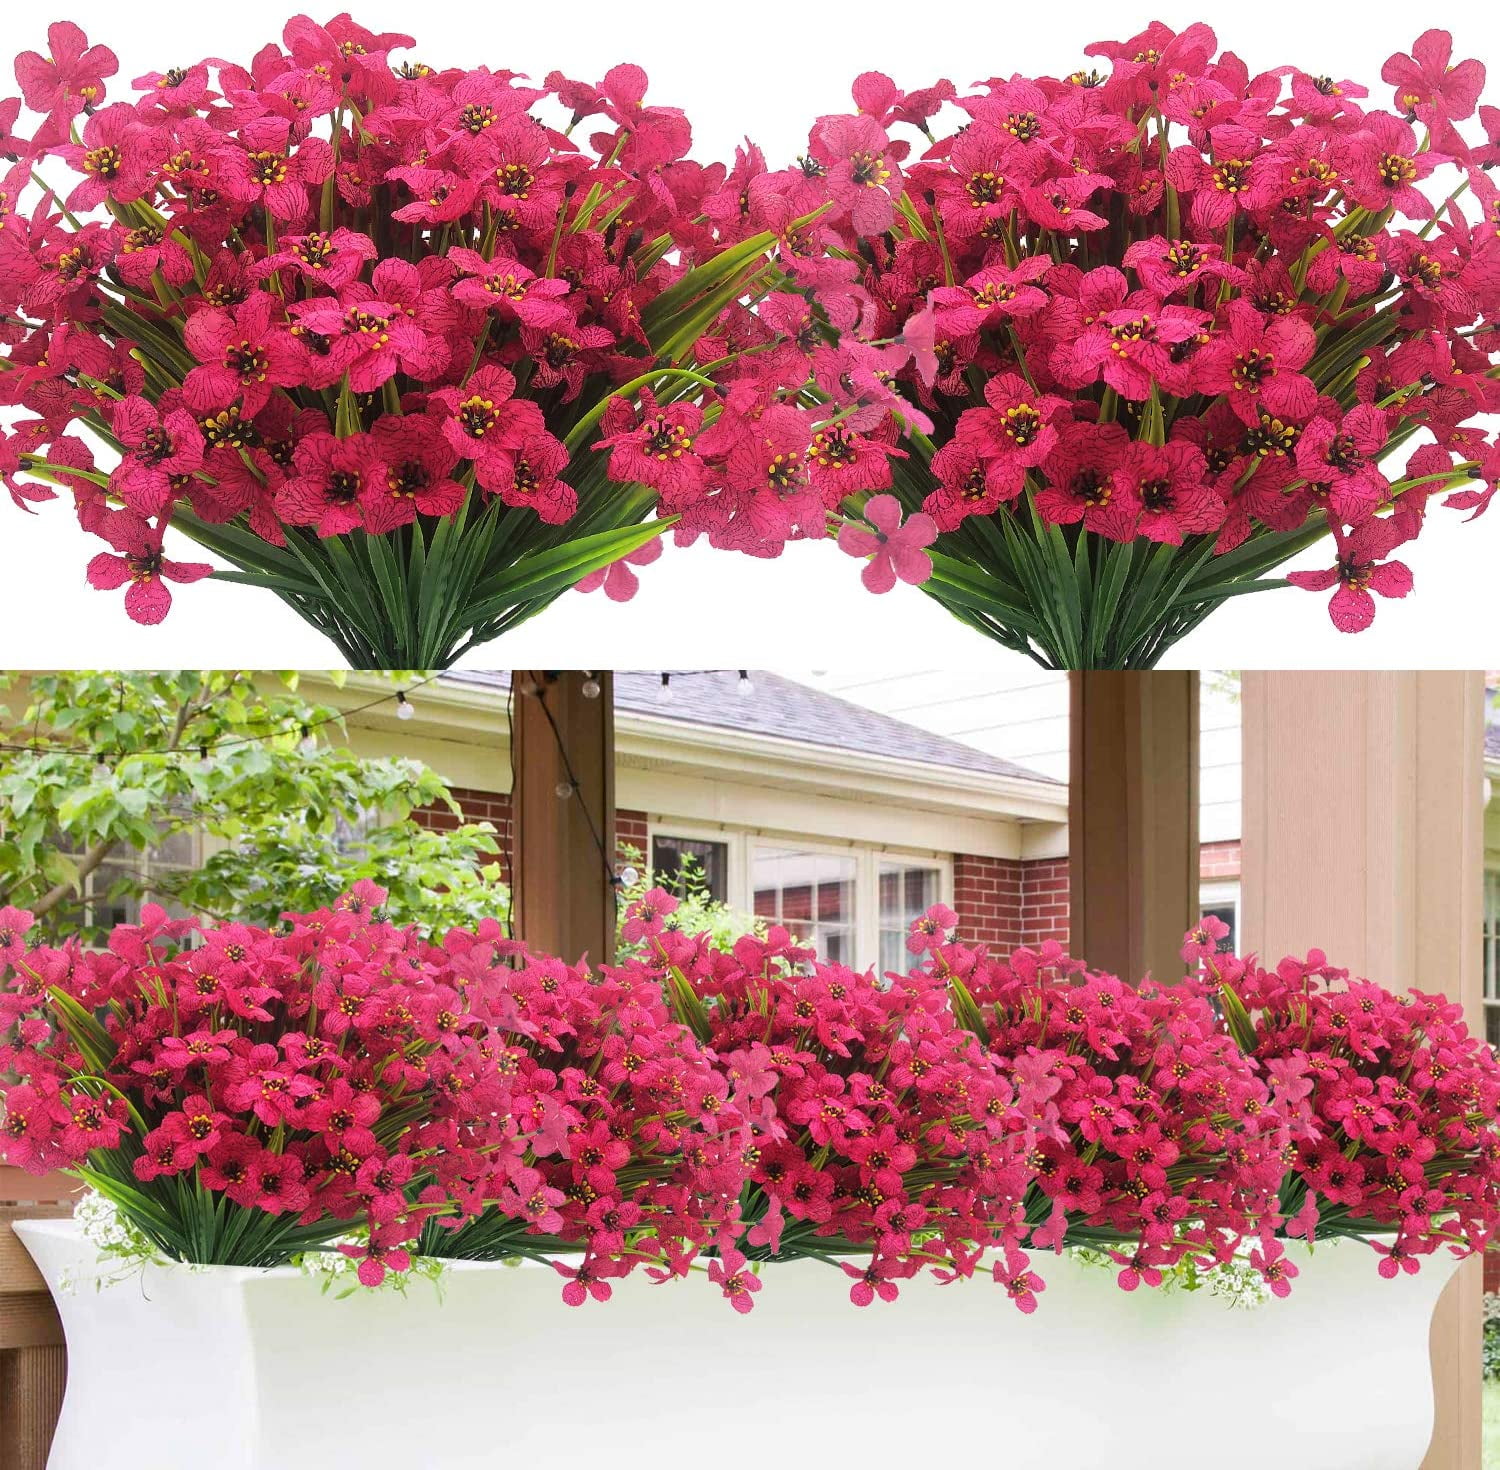 4pcs Artificial Flowers Fake Plant Outdoor Faux Floral Greenery Shrubs Rose Deco 